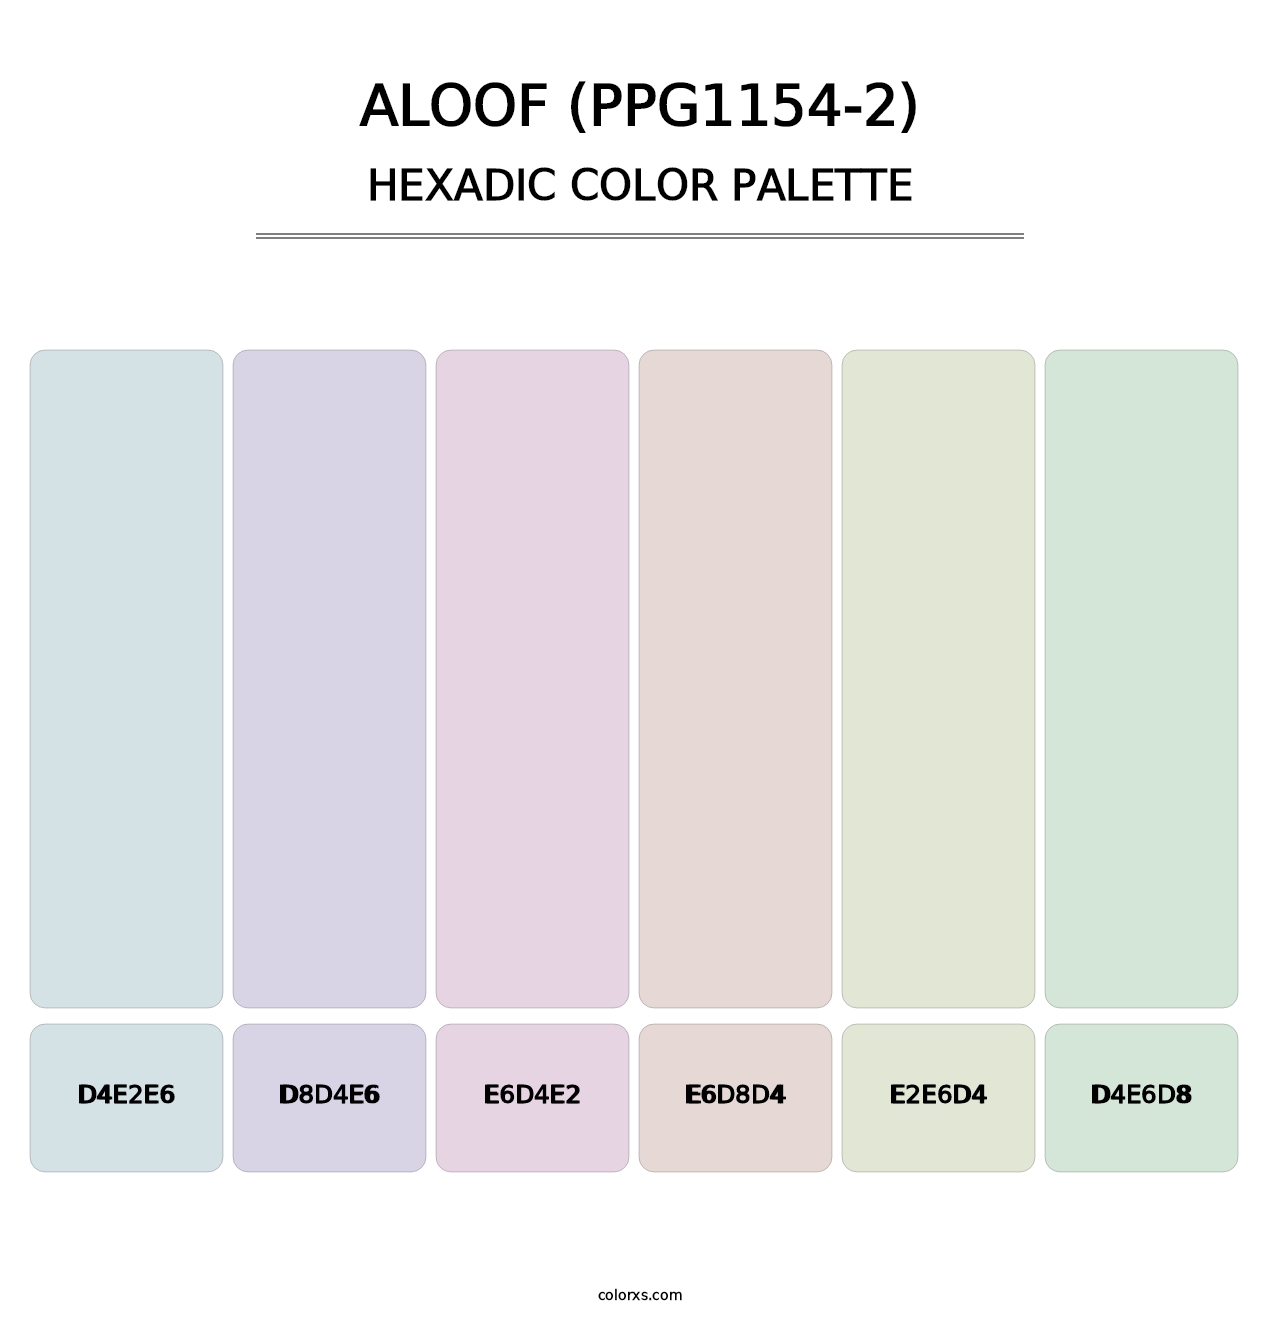 Aloof (PPG1154-2) - Hexadic Color Palette